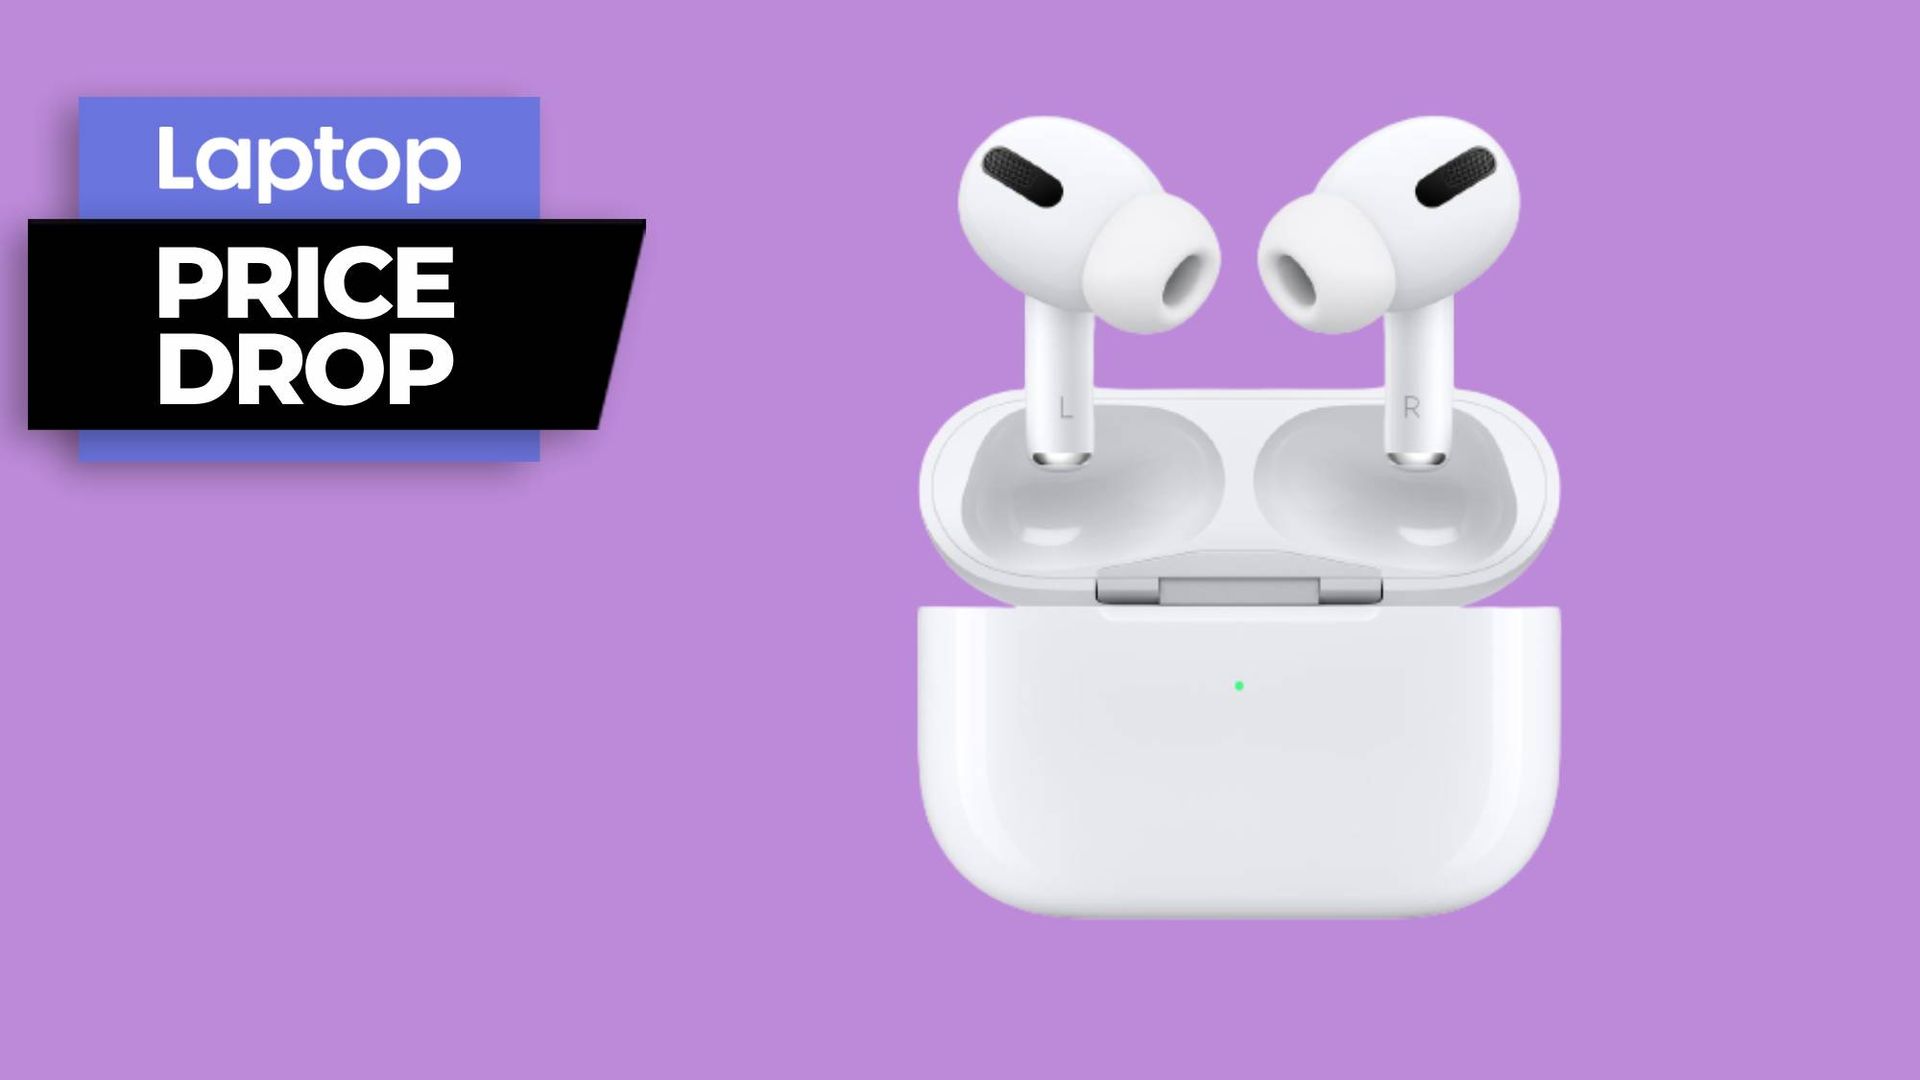 AirPods Pro are still just 169 for Prime Day! Grab them while you can